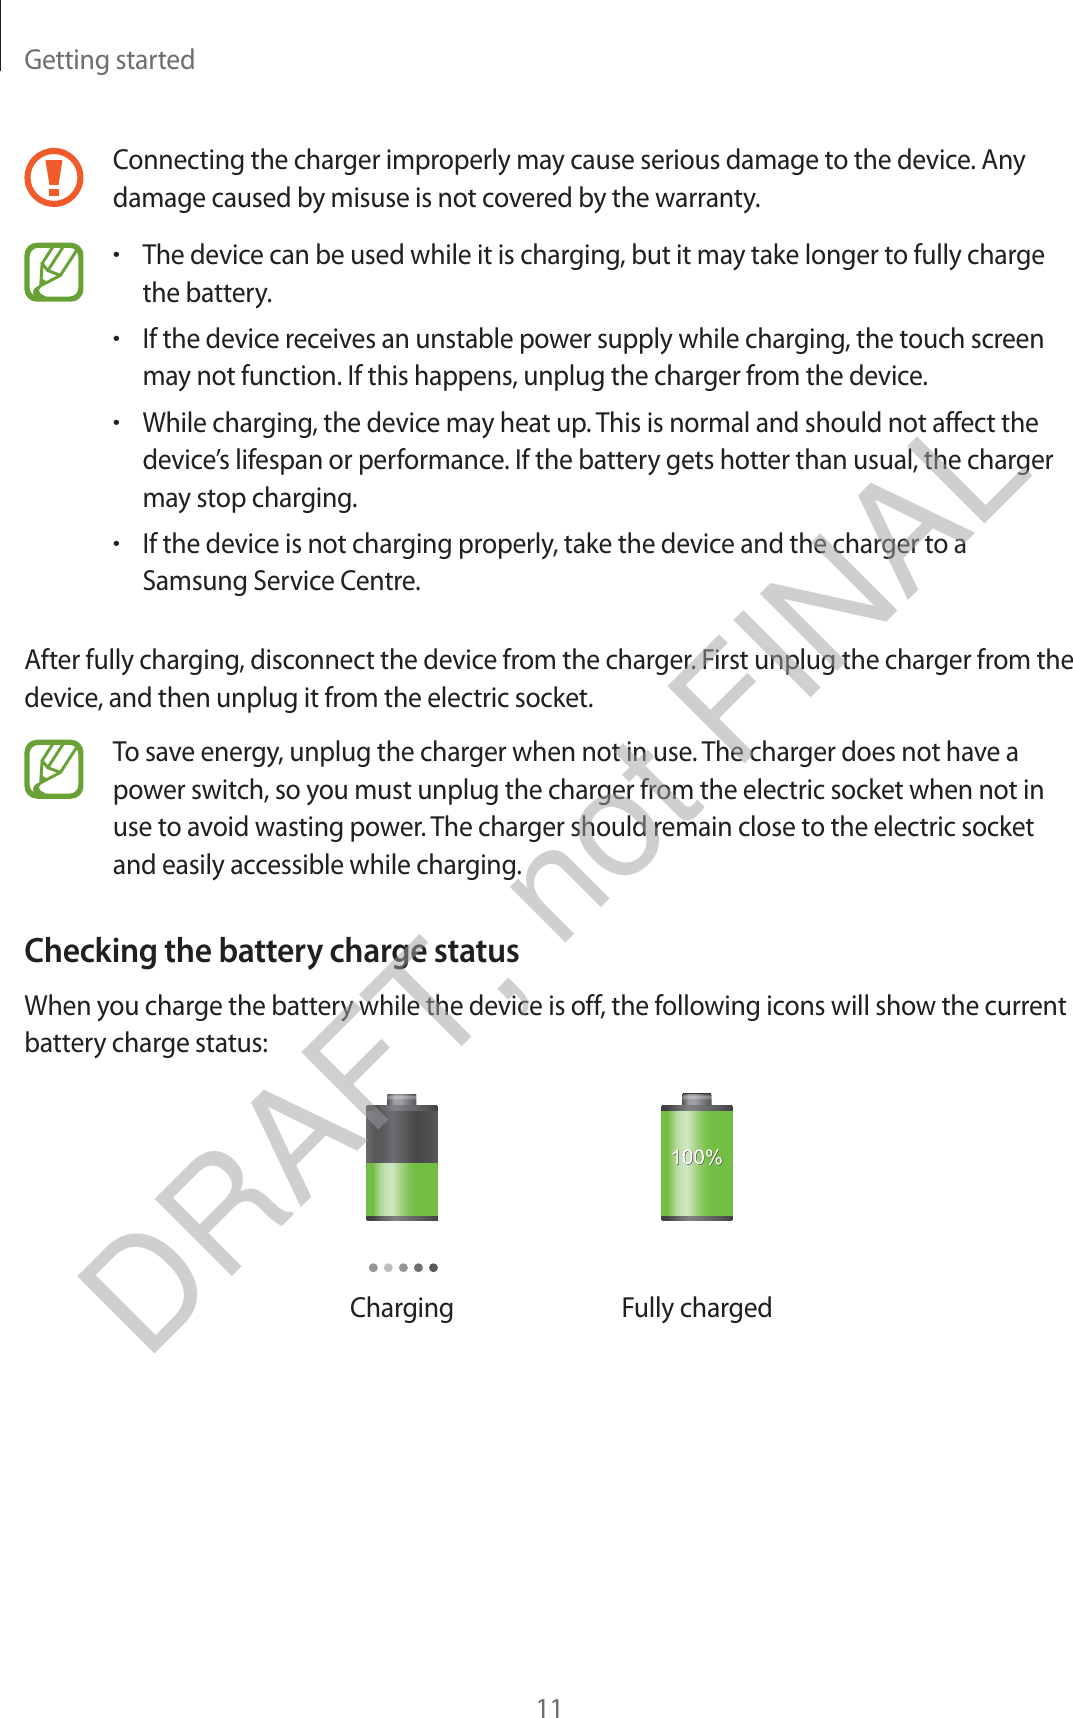 Getting started11Connecting the charger improperly may cause serious damage to the device. Any damage caused by misuse is not covered by the warranty.rThe device can be used while it is charging, but it may take longer to fully charge the battery.rIf the device receives an unstable power supply while charging, the touch screen may not function. If this happens, unplug the charger from the device.rWhile charging, the device may heat up. This is normal and should not affect the device’s lifespan or performance. If the battery gets hotter than usual, the charger may stop charging.rIf the device is not charging properly, take the device and the charger to a Samsung Service Centre.After fully charging, disconnect the device from the charger. First unplug the charger from the device, and then unplug it from the electric socket.To save energy, unplug the charger when not in use. The charger does not have a power switch, so you must unplug the charger from the electric socket when not in use to avoid wasting power. The charger should remain close to the electric socket and easily accessible while charging.Checking the battery charge statusWhen you charge the battery while the device is off, the following icons will show the current battery charge status:Charging Fully chargedDRAFT, not FINAL